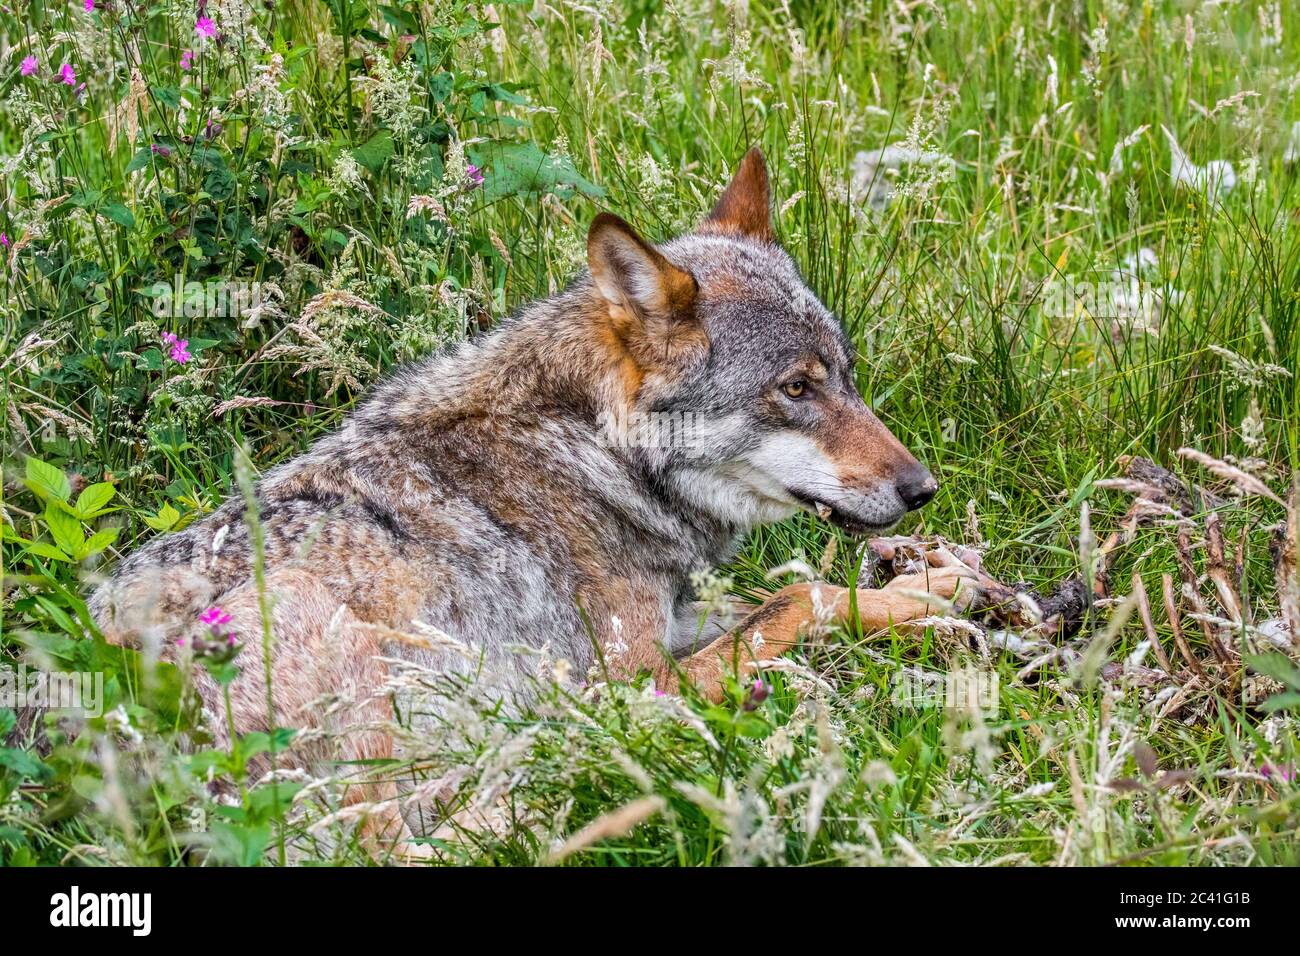 Grey wolf (Canis lupus) eating from carcass of killed sheep in field Stock Photo